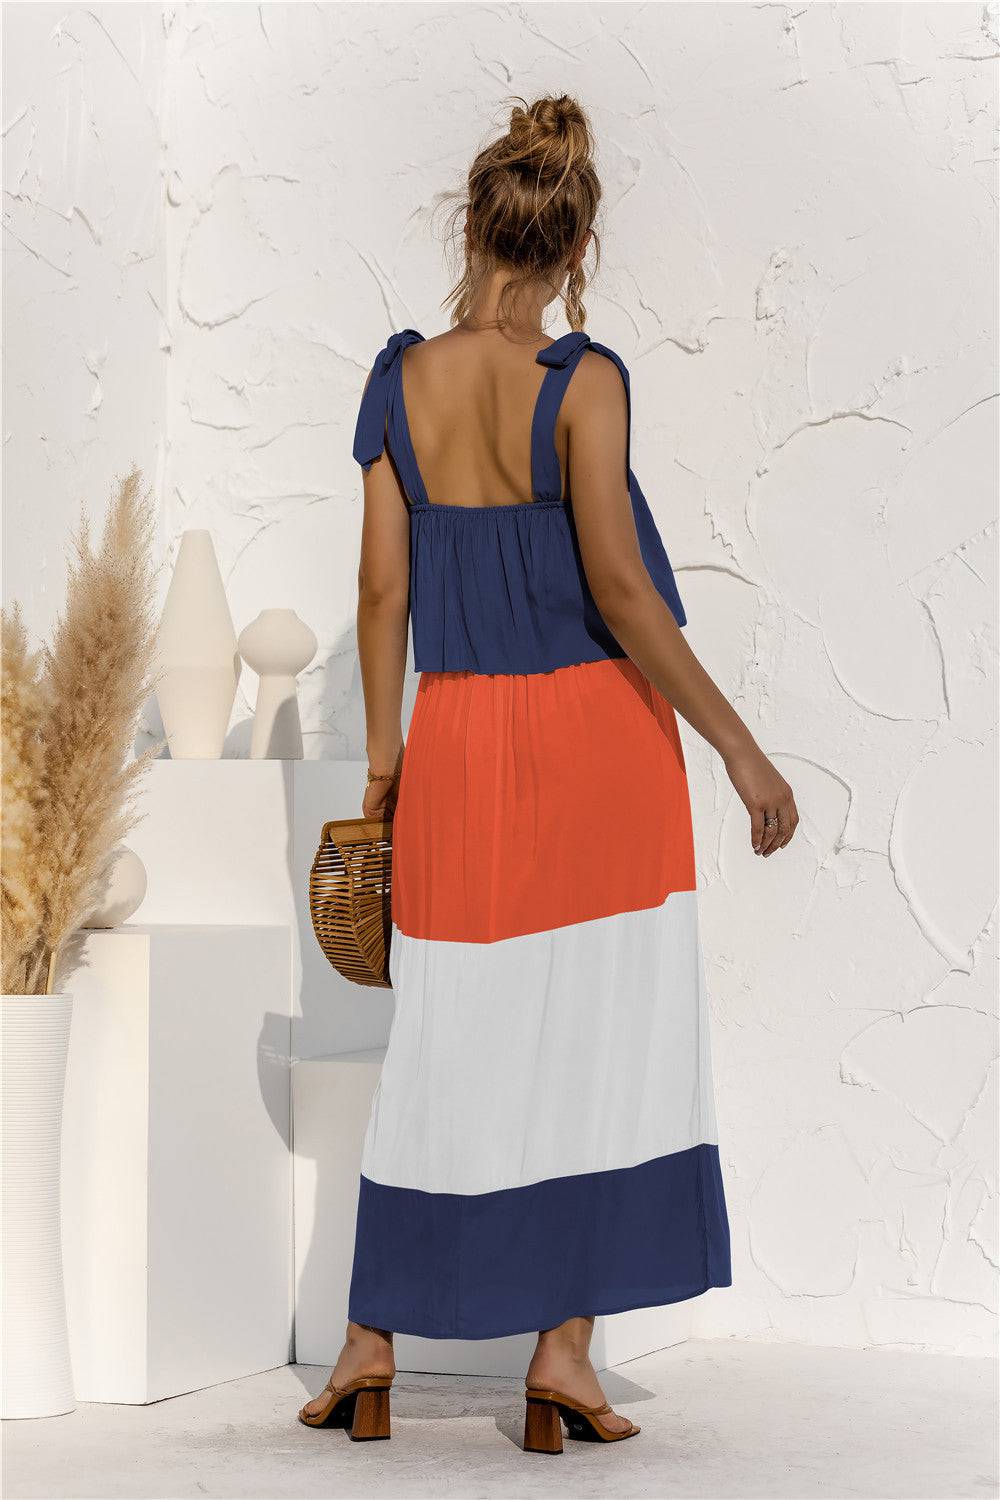 Lady in Color Block Sleeveless Dress - Embrace Your Inner Beauty and Charm Effortlessly - Radiate with Unbridled Elegance - Guy Christopher